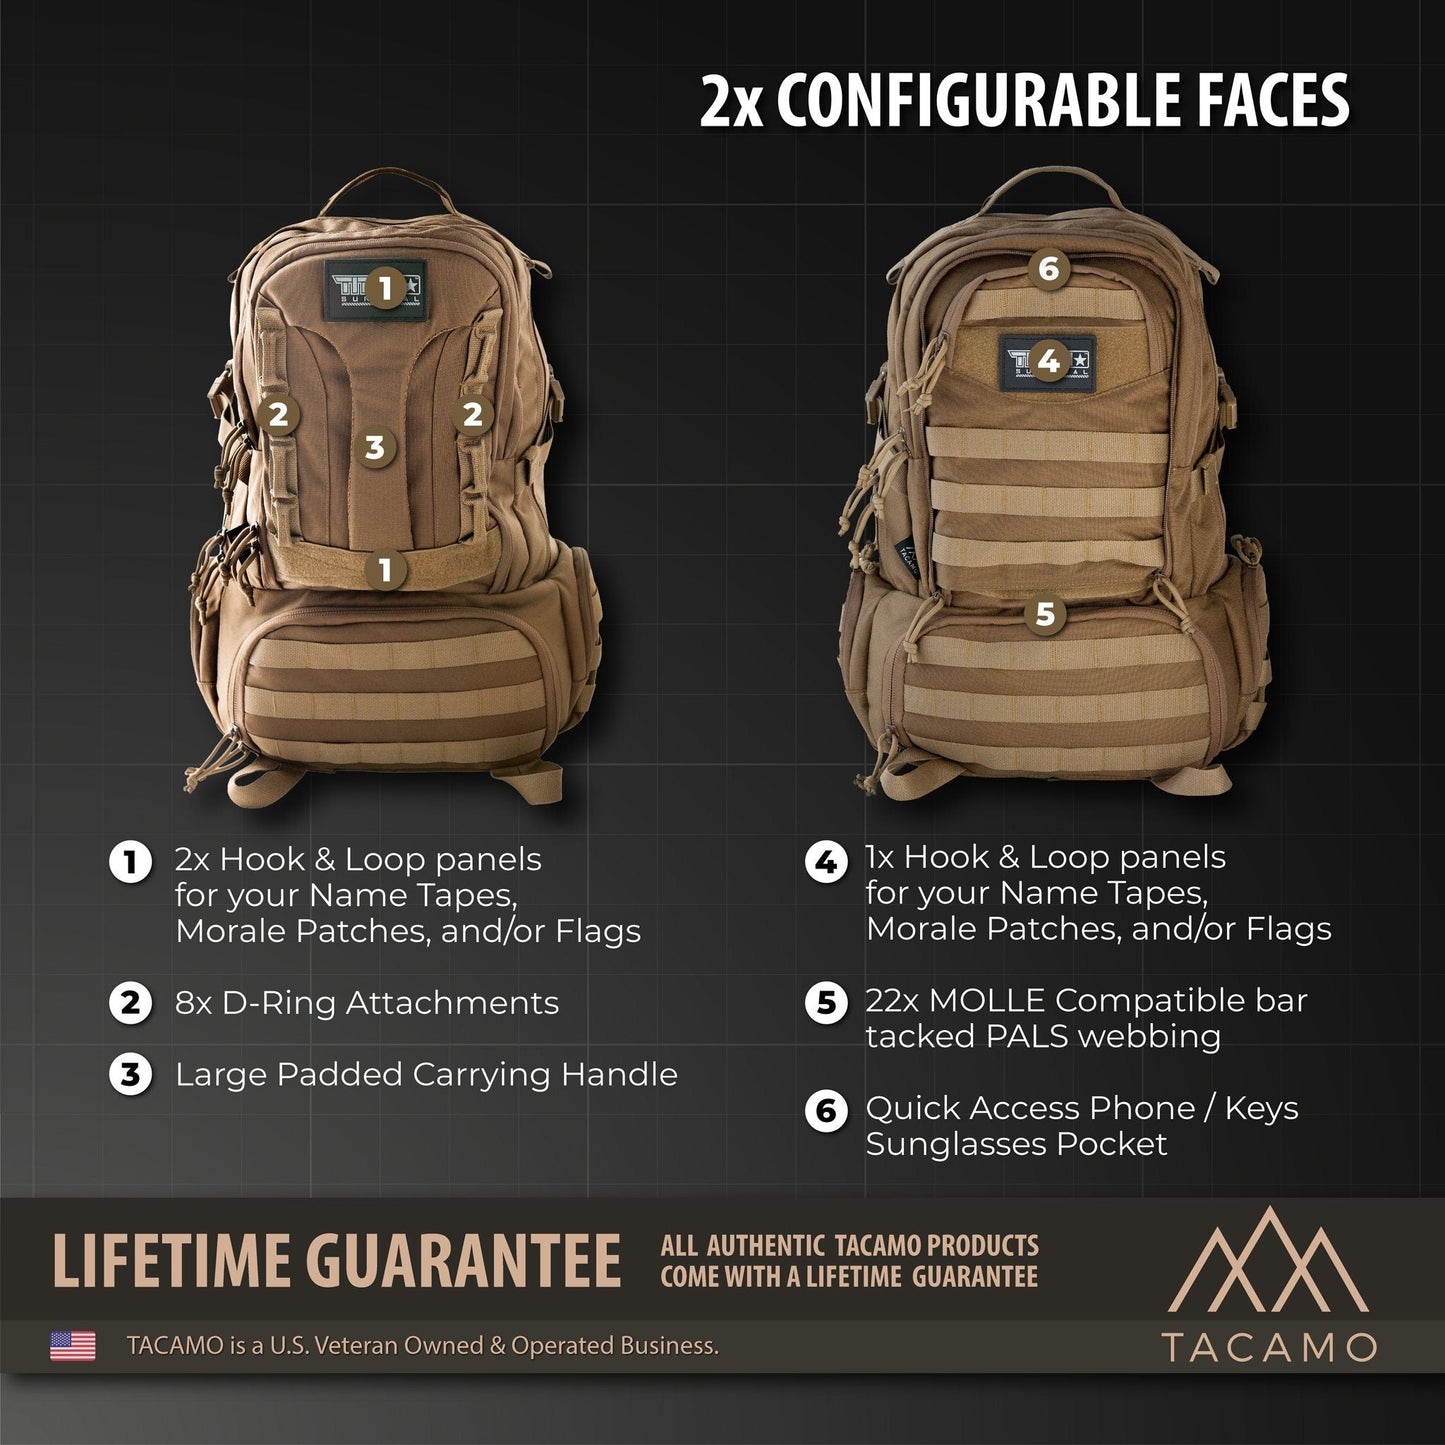 Side-by-side comparison of two configurable BC50 50L Tactical Backpack faces